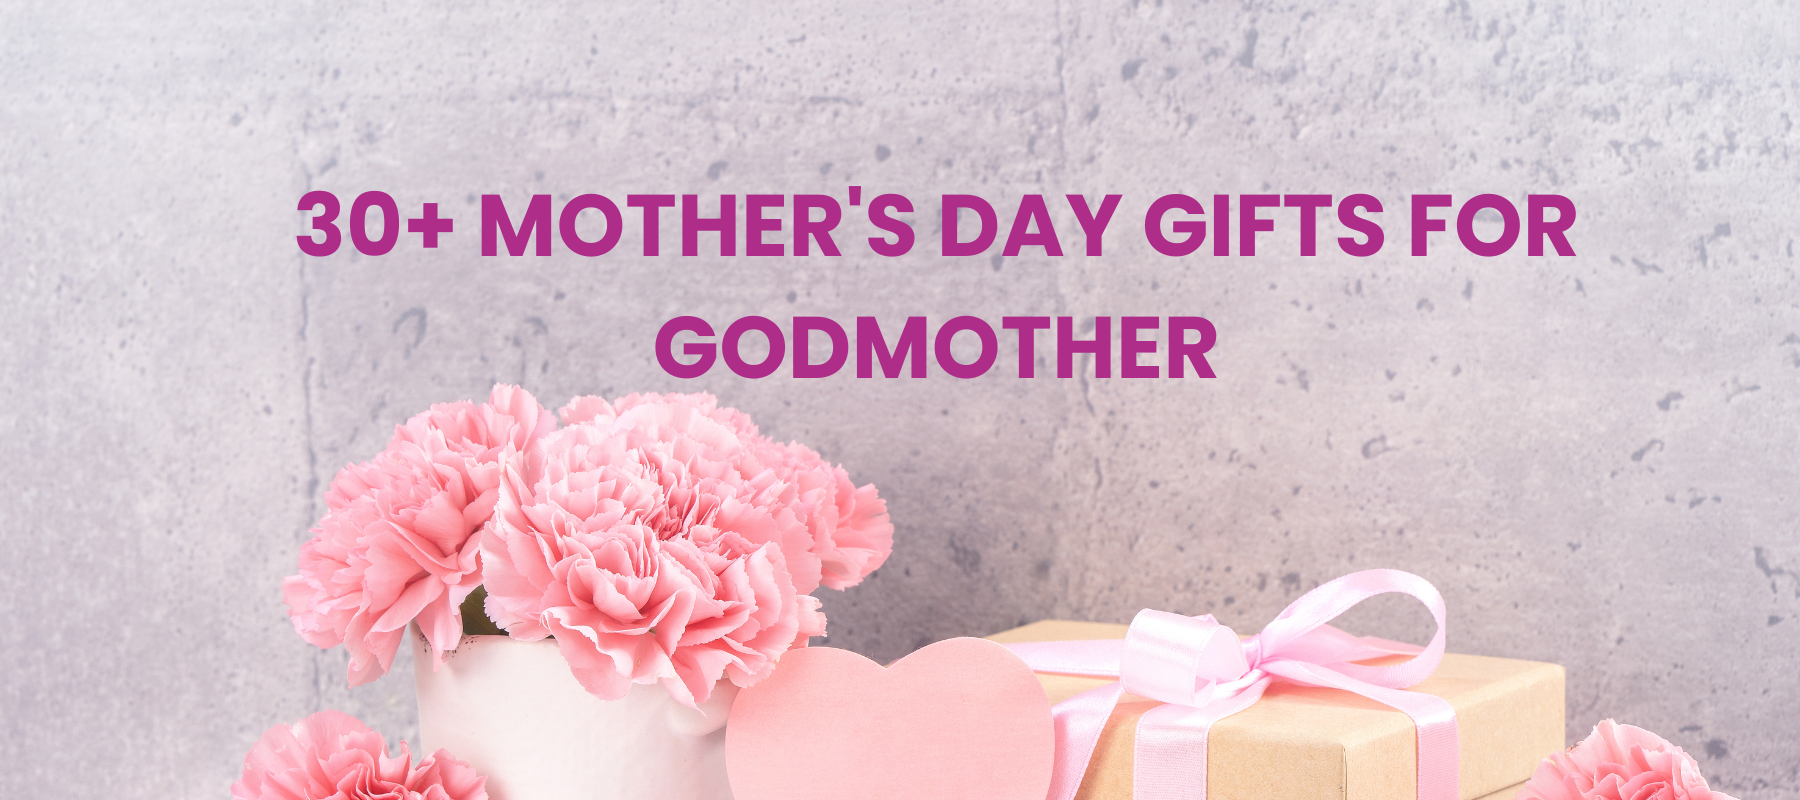 Mother’s Day Gifts For Godmother That Are Extra Meaningful